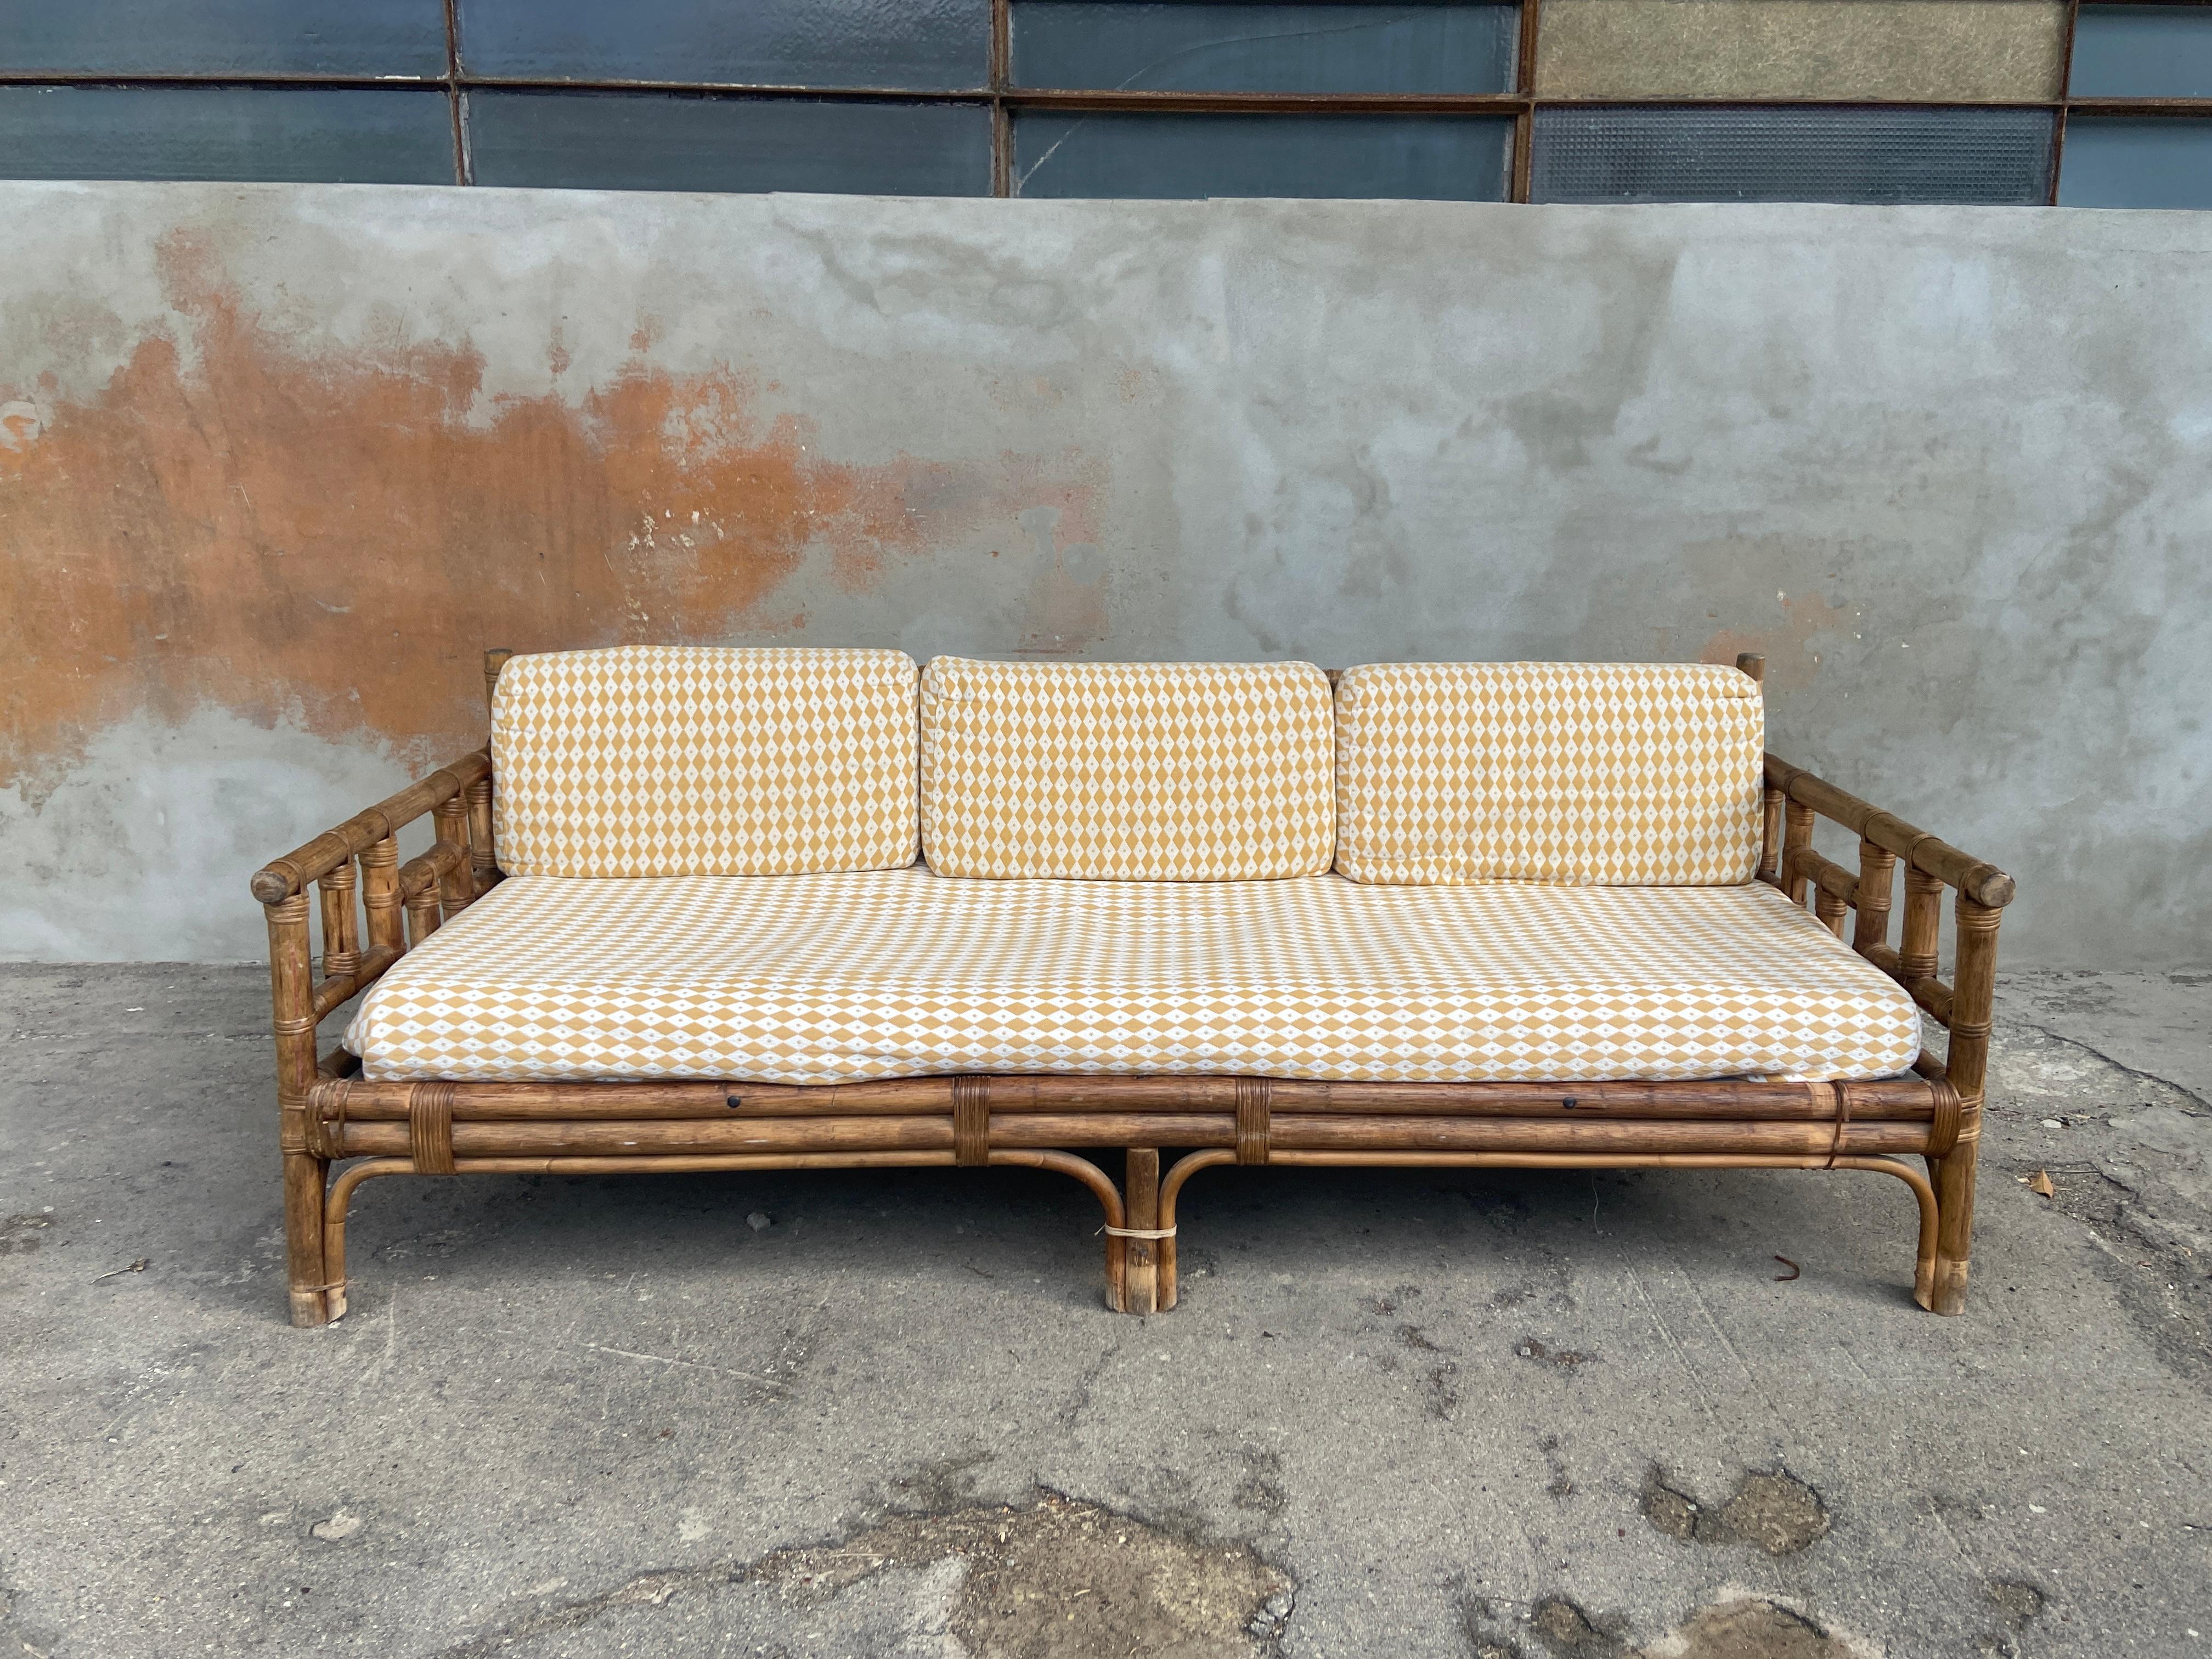 Mid-Century Modern Italian Vivai del Sud bamboo sofa with its original cushions covered with cotton fabric.
The sofa is in good vintage conditions with light sings of age and use. The structure is sturdy.
Cost for the restoration on request